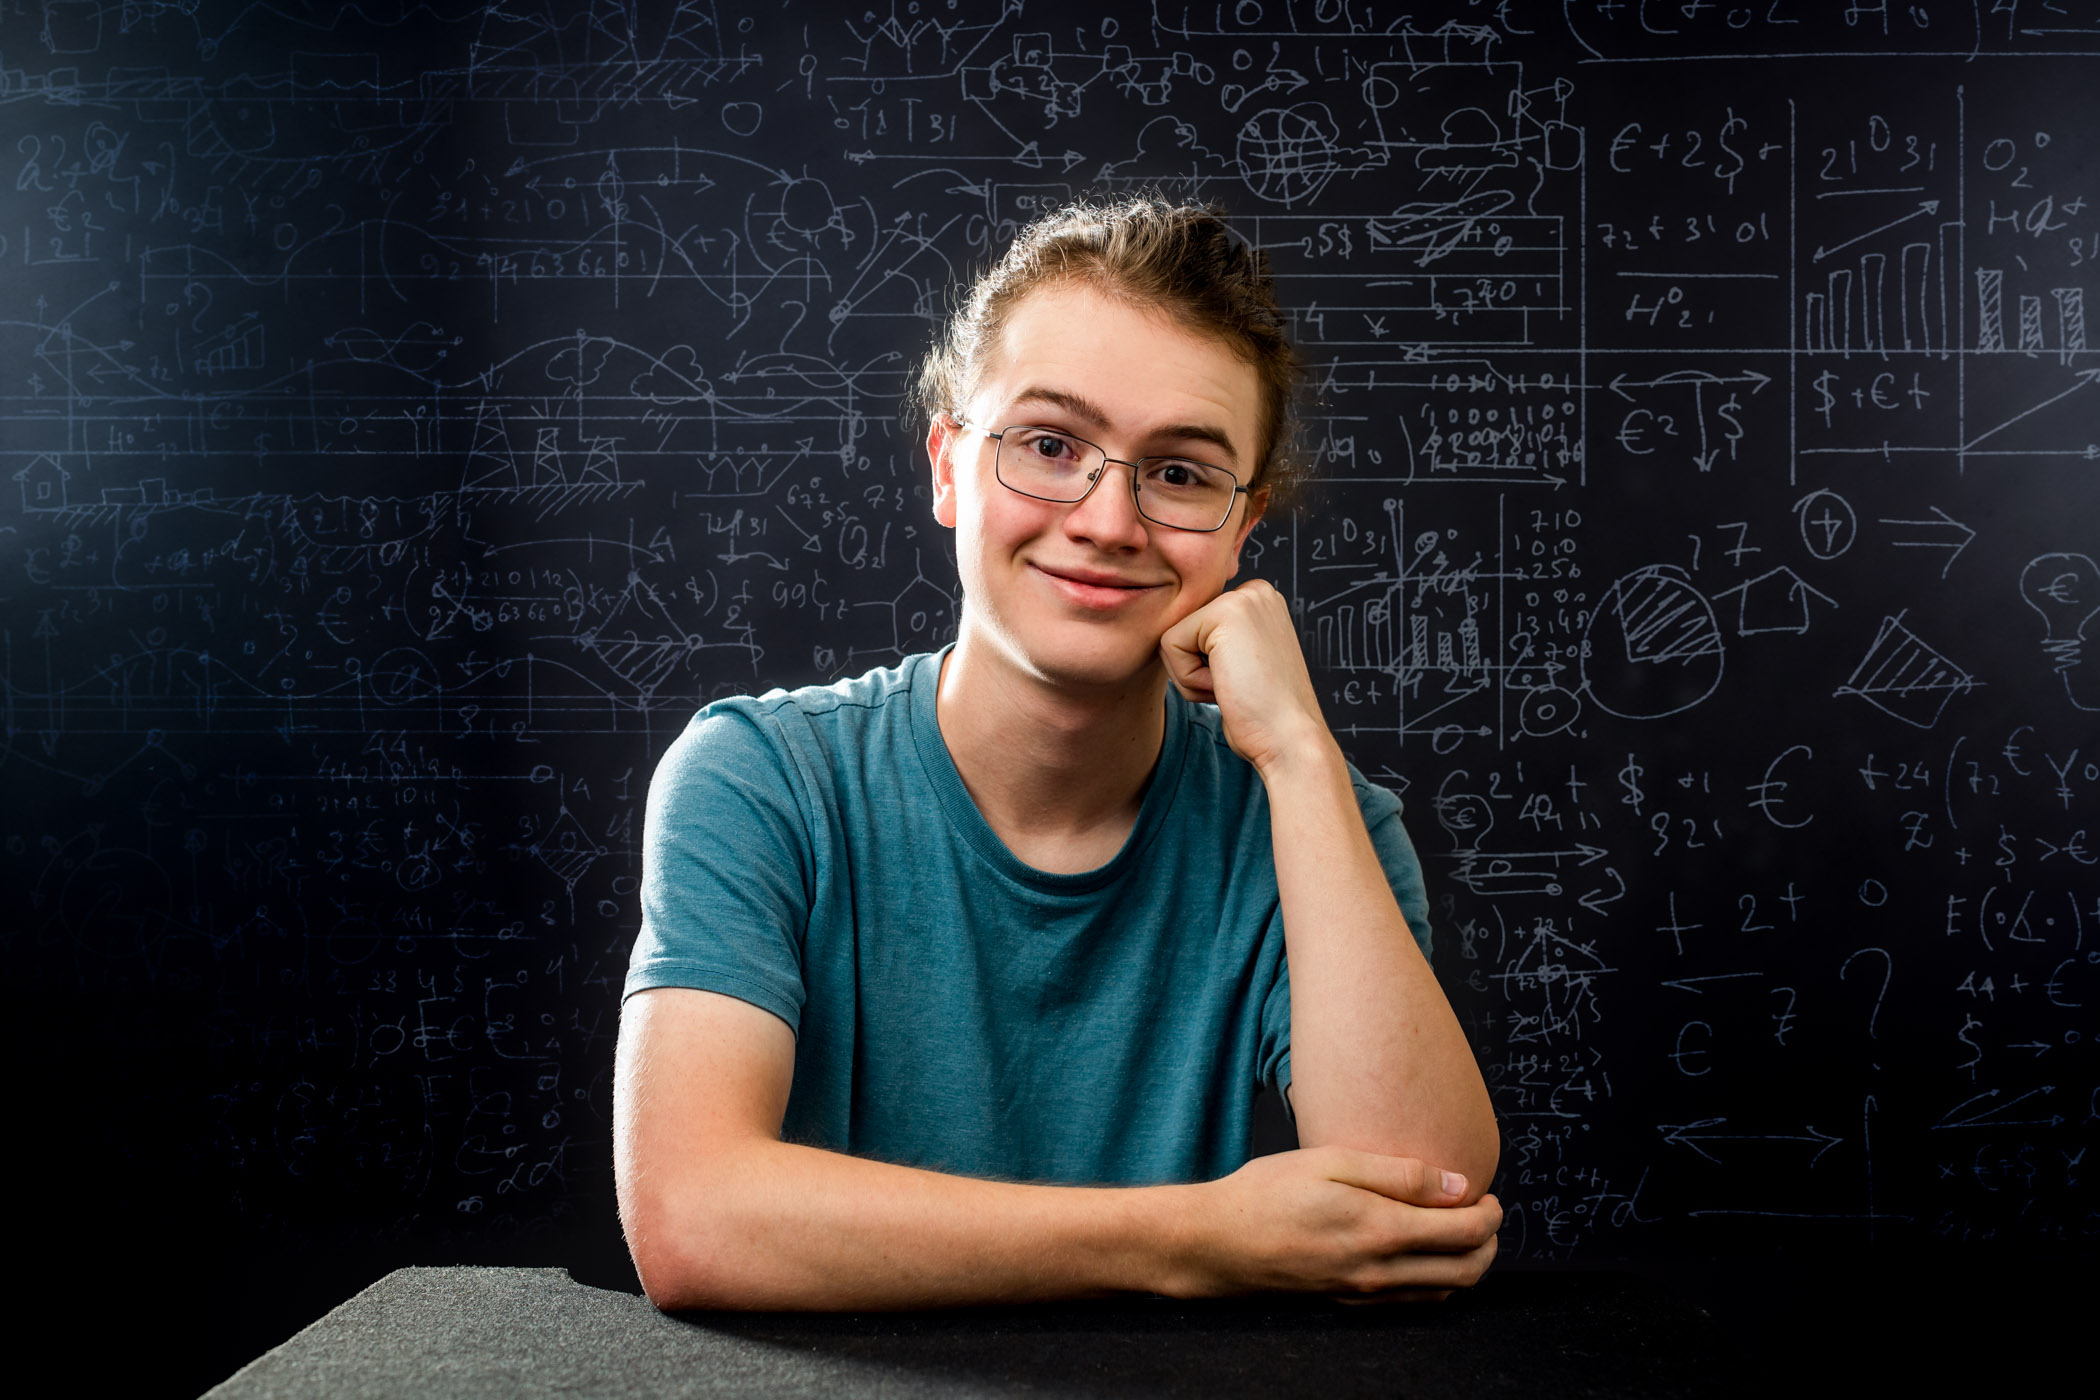 Ben Wilson, pictured in front of a board with several math equations